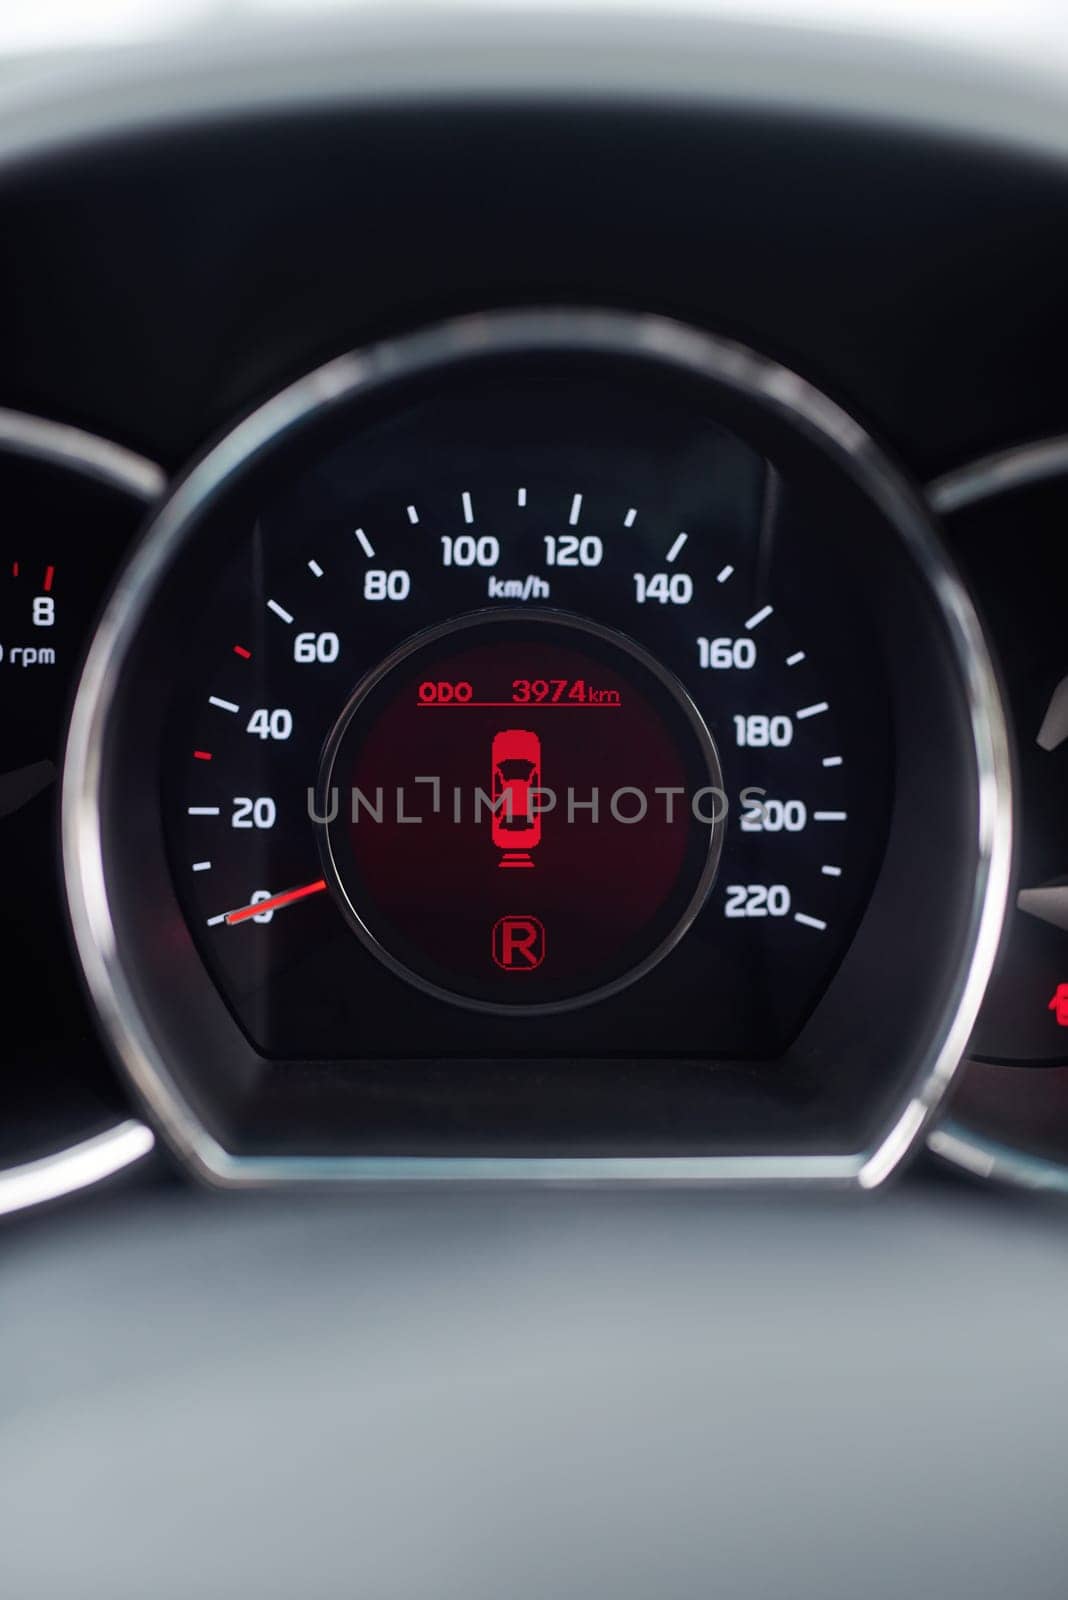 Dashboard, reverse and speedometer of car for information, safety or travel with lights closeup. Automobile, transportation and system display on vehicle interior for drive, journey or road trip.